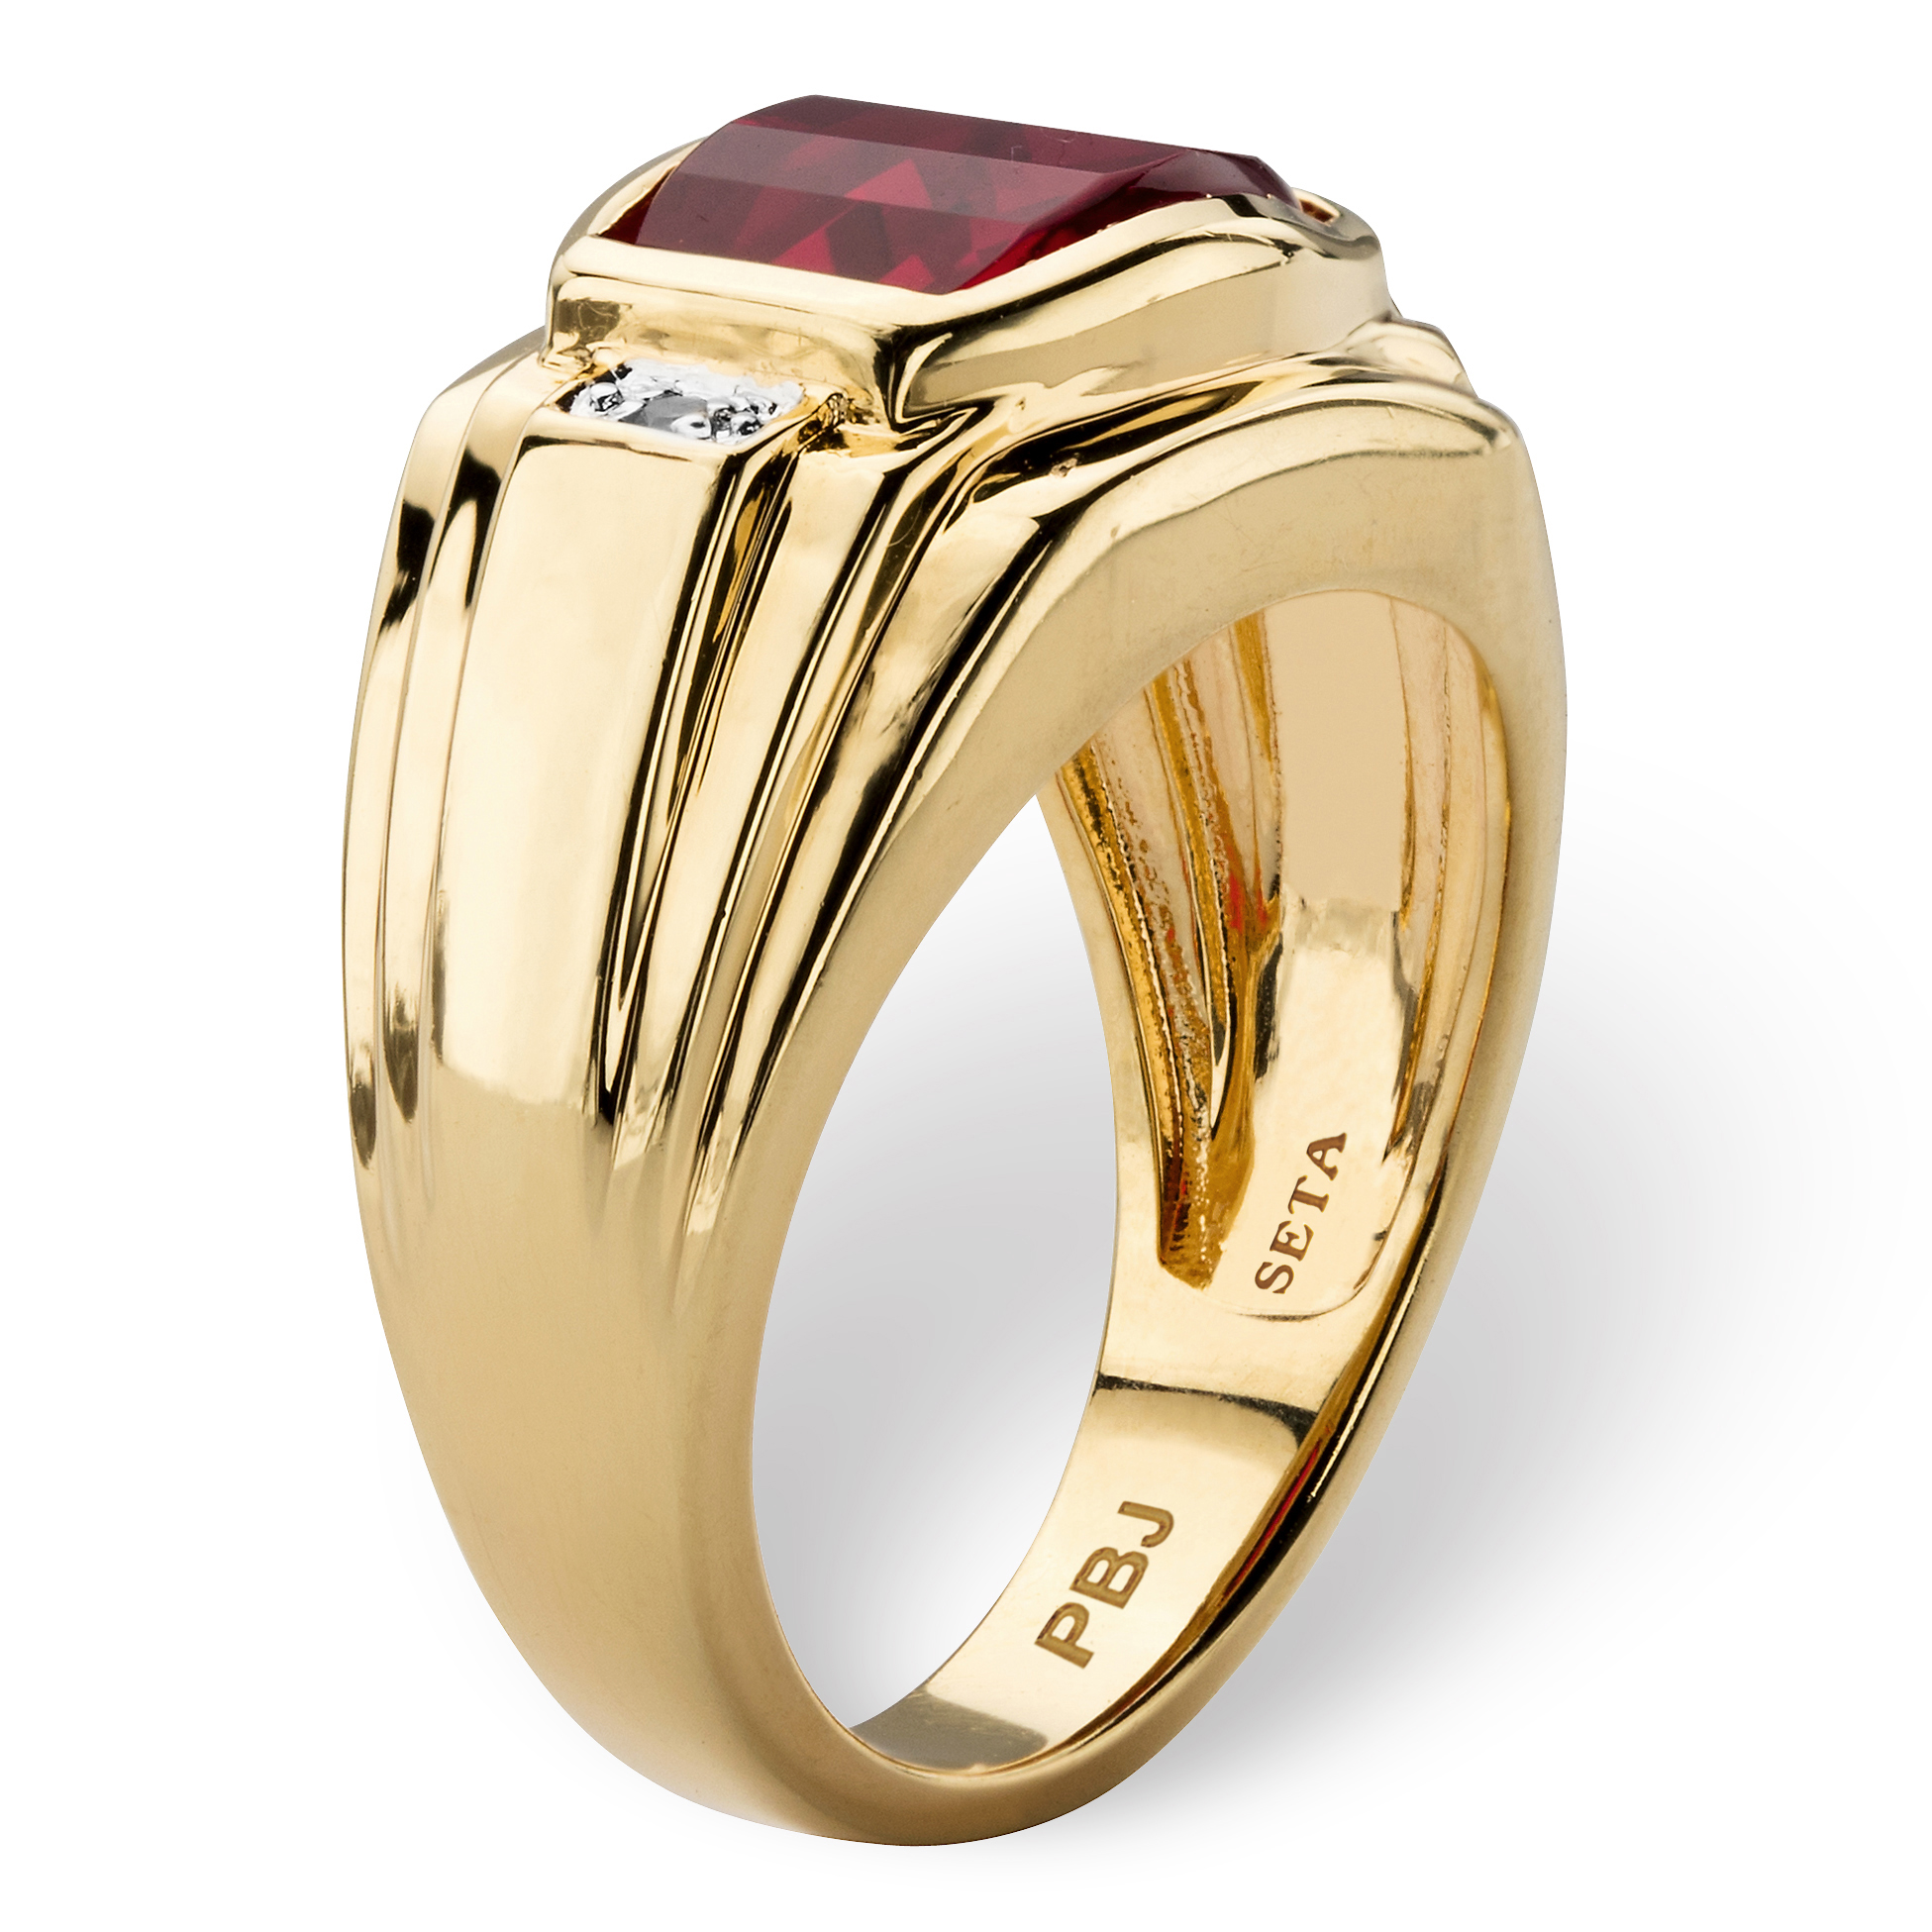 PalmBeach Jewelry Men's 2.77 TCW Cushion-Cut Created Red Ruby and Diamond Accent Ring Yellow Gold-Plated